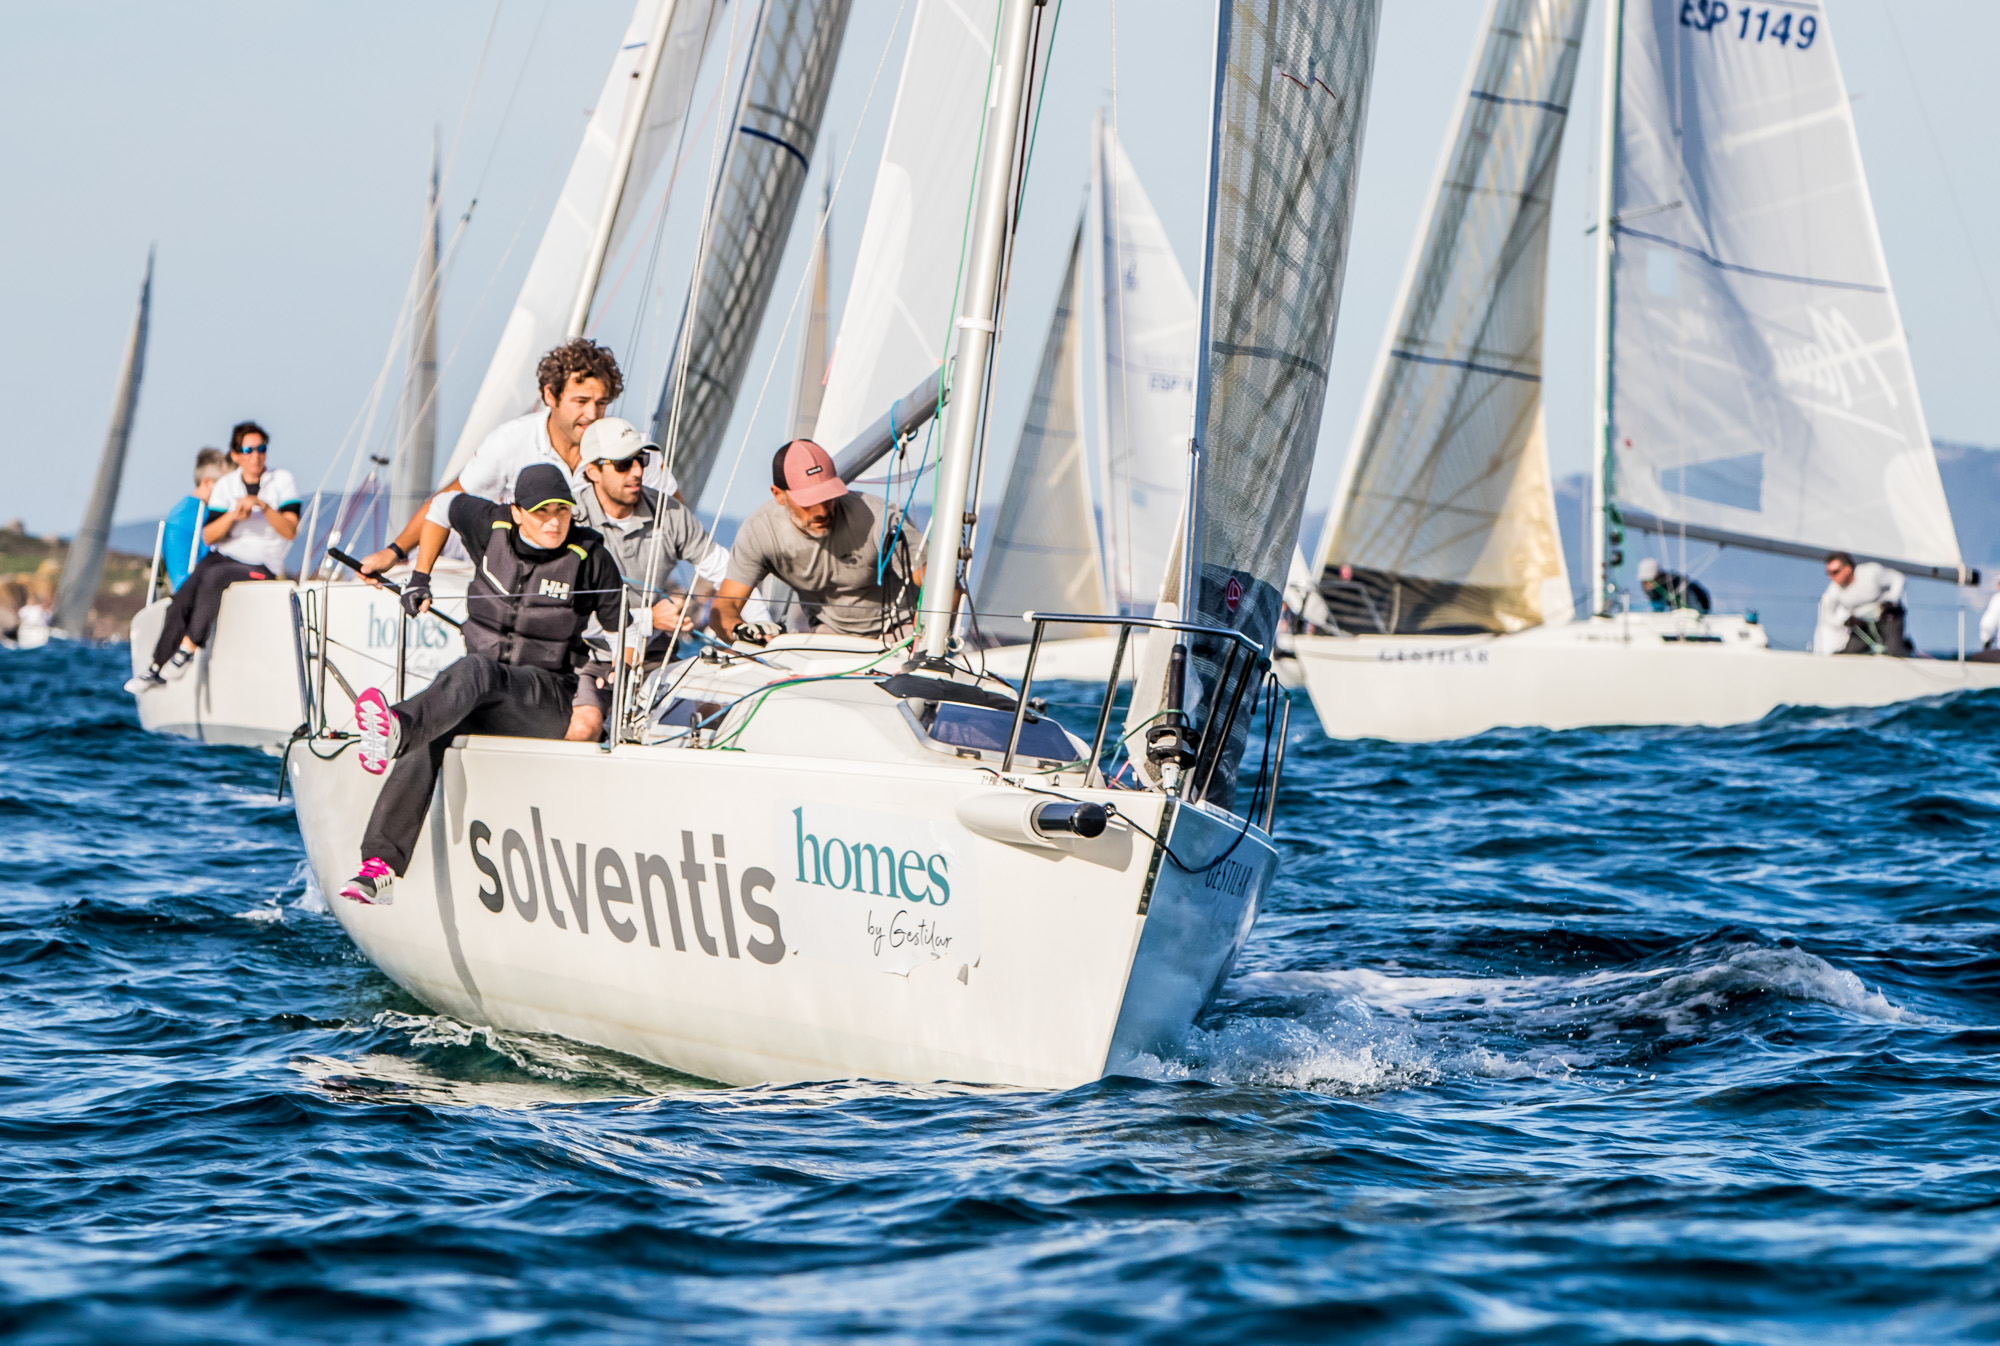 The Gestilar J80 Autumn League faces the start of the final stretch this Saturday in Baiona